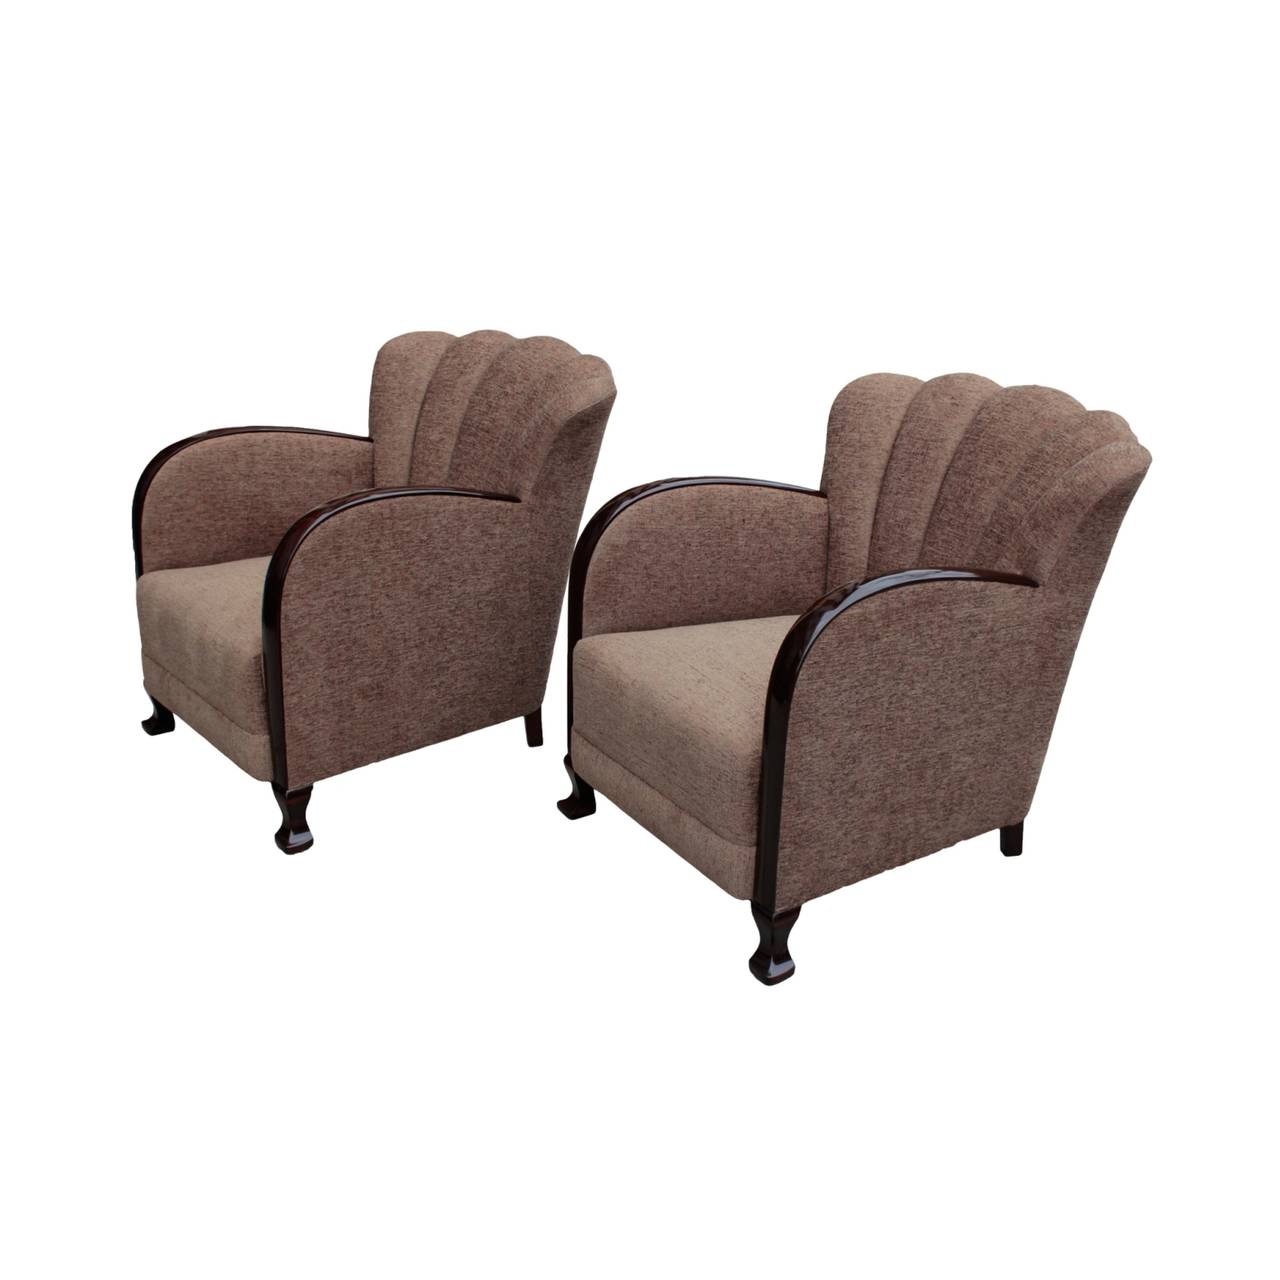 Each having vertically channeled, scallop shaped back rest and curved arm rests, front cabriole legs and slanted back legs in dark stained flame birch.